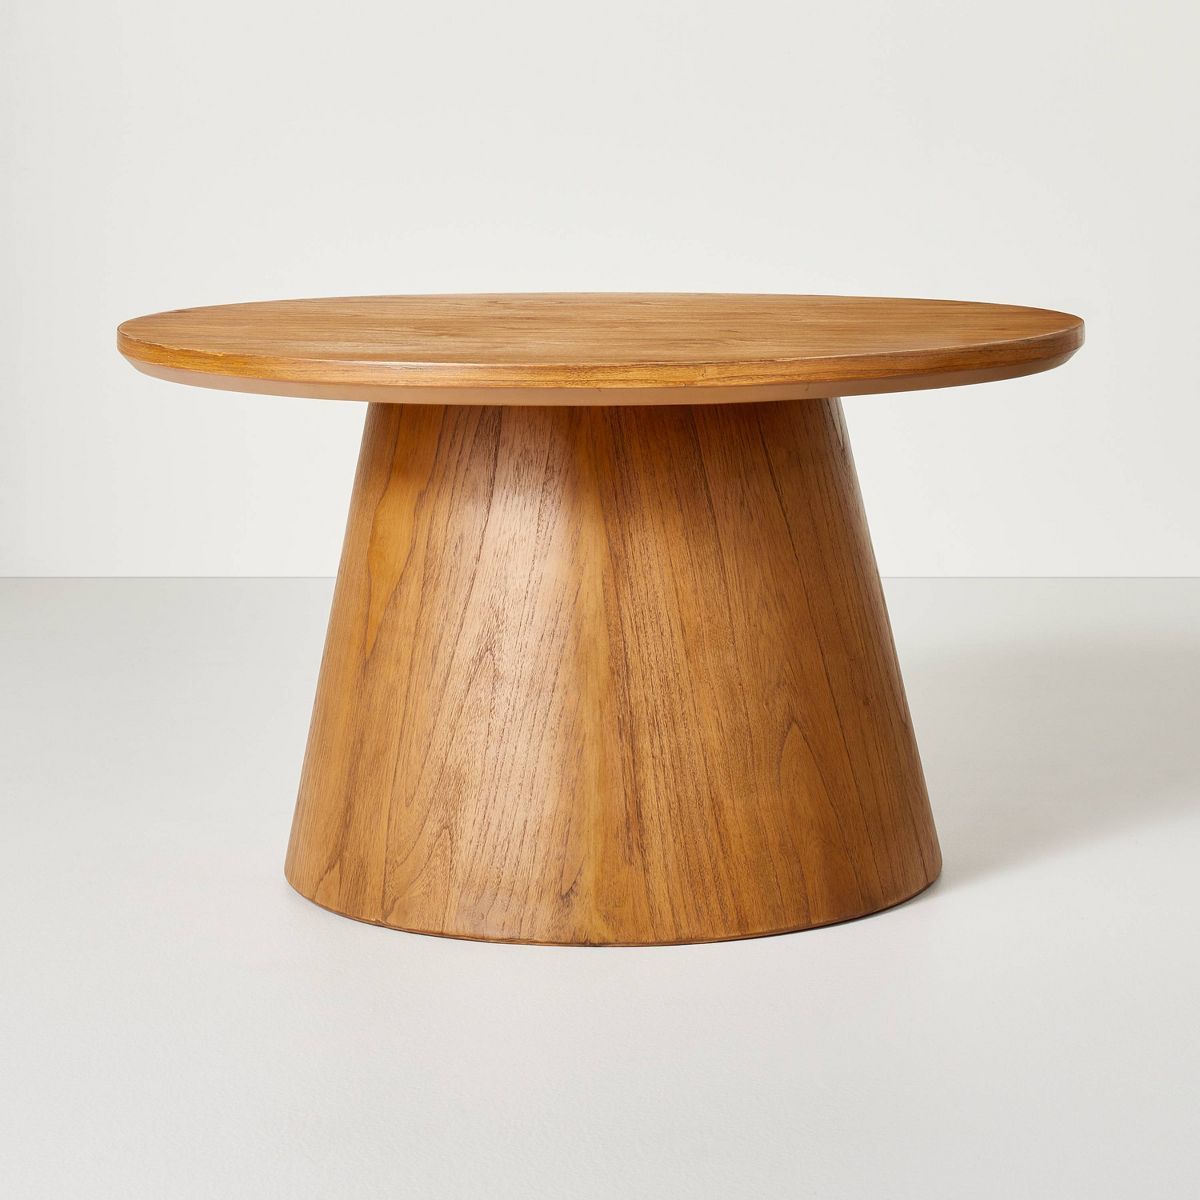 Wooden Round Pedestal Coffee Table - Hearth & Hand™ with Magnolia | Target